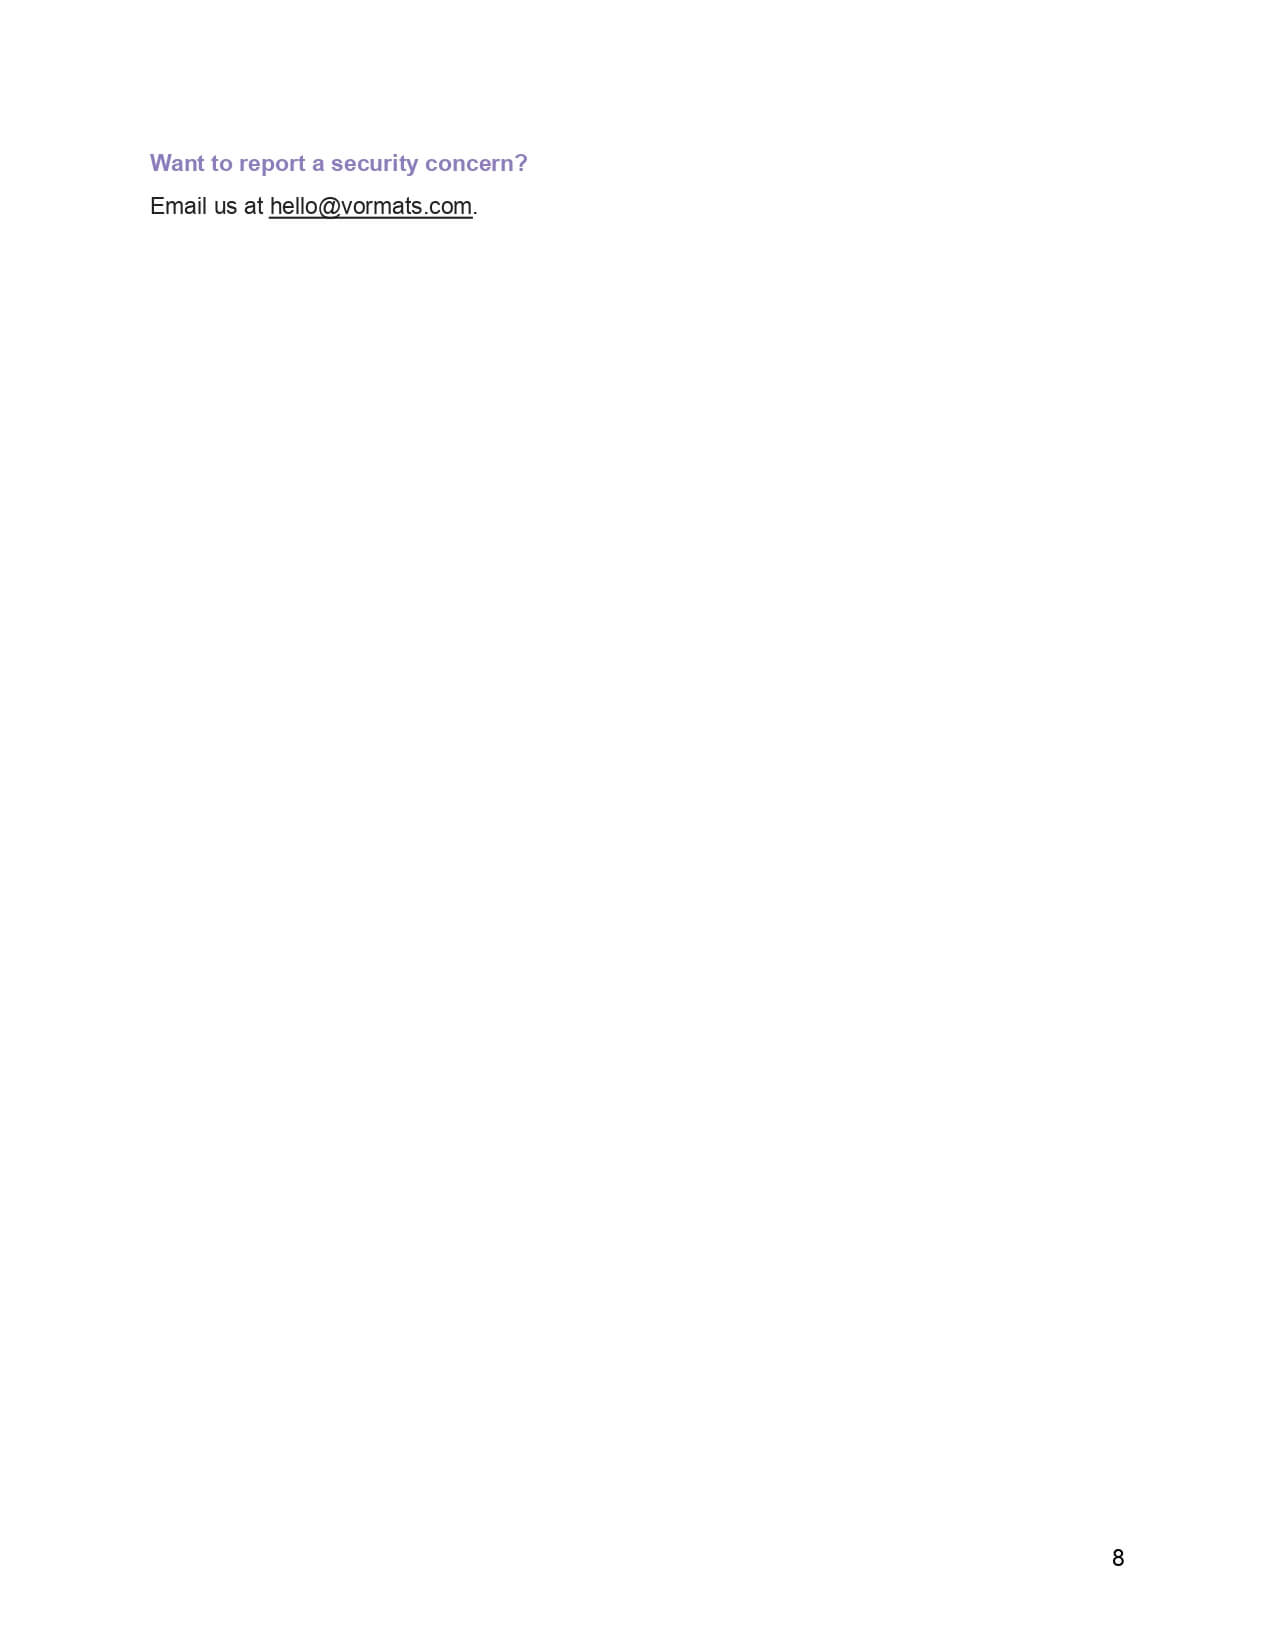 Security_White_paper.docx_page-0008